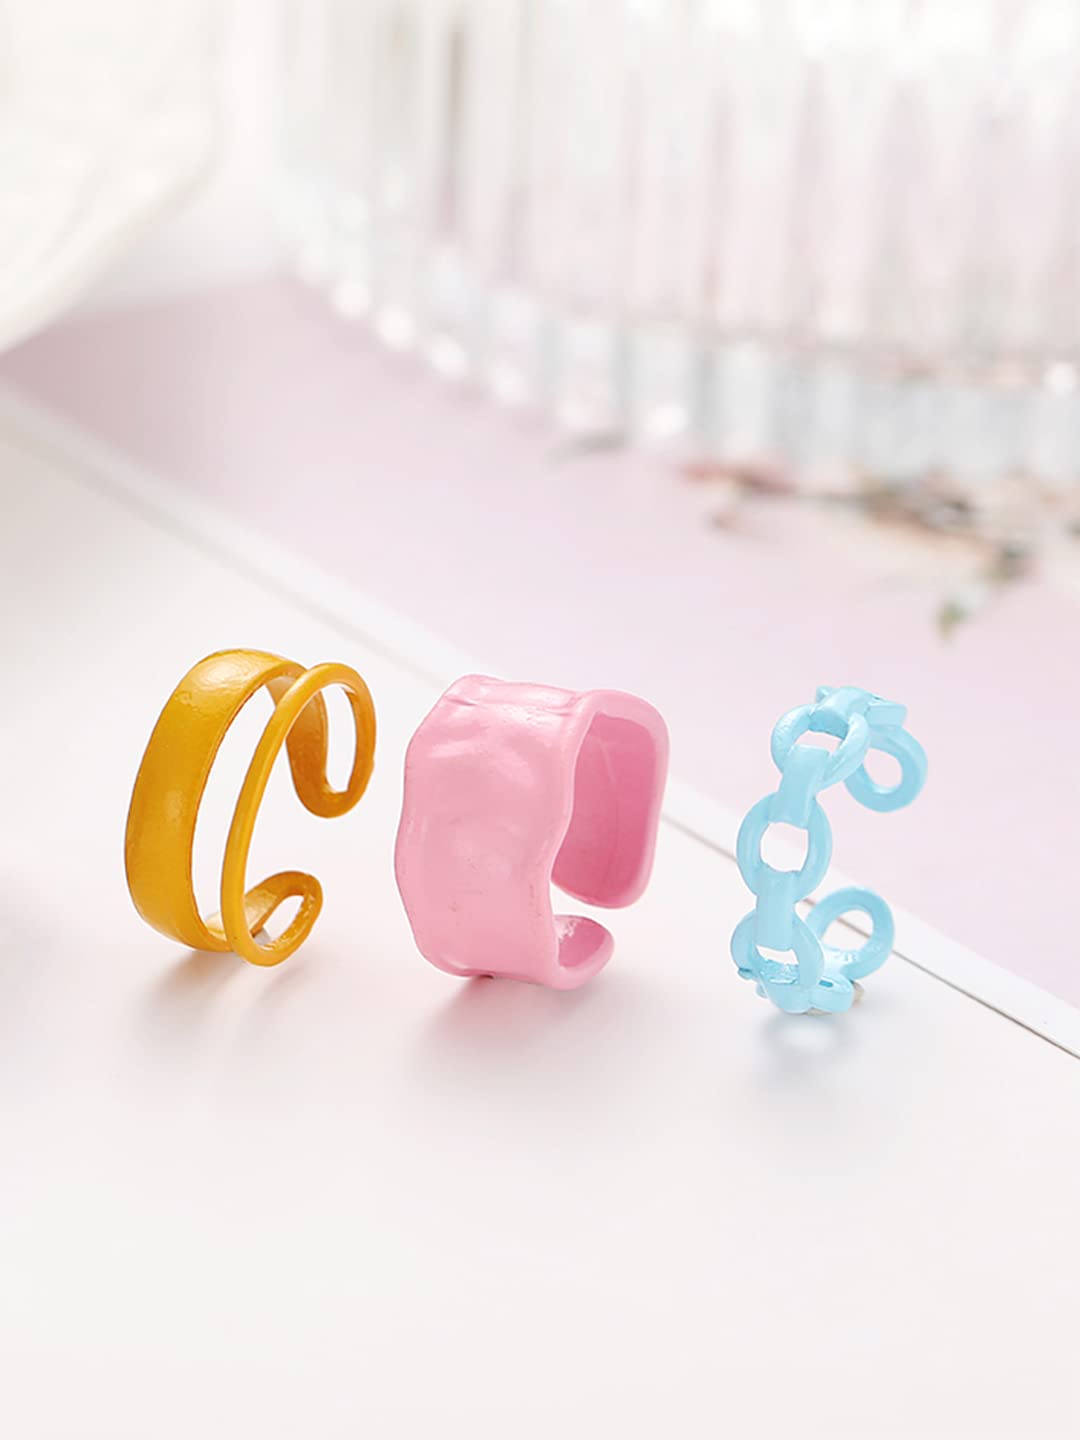 Yellow Chimes Rings for Women and Girls Adjustable Rings | Multicolor 3 Pcs Chunky Chain Ring Set Knuckle Finger Stackable Band Ring | Birthday Gift For Girls and Women